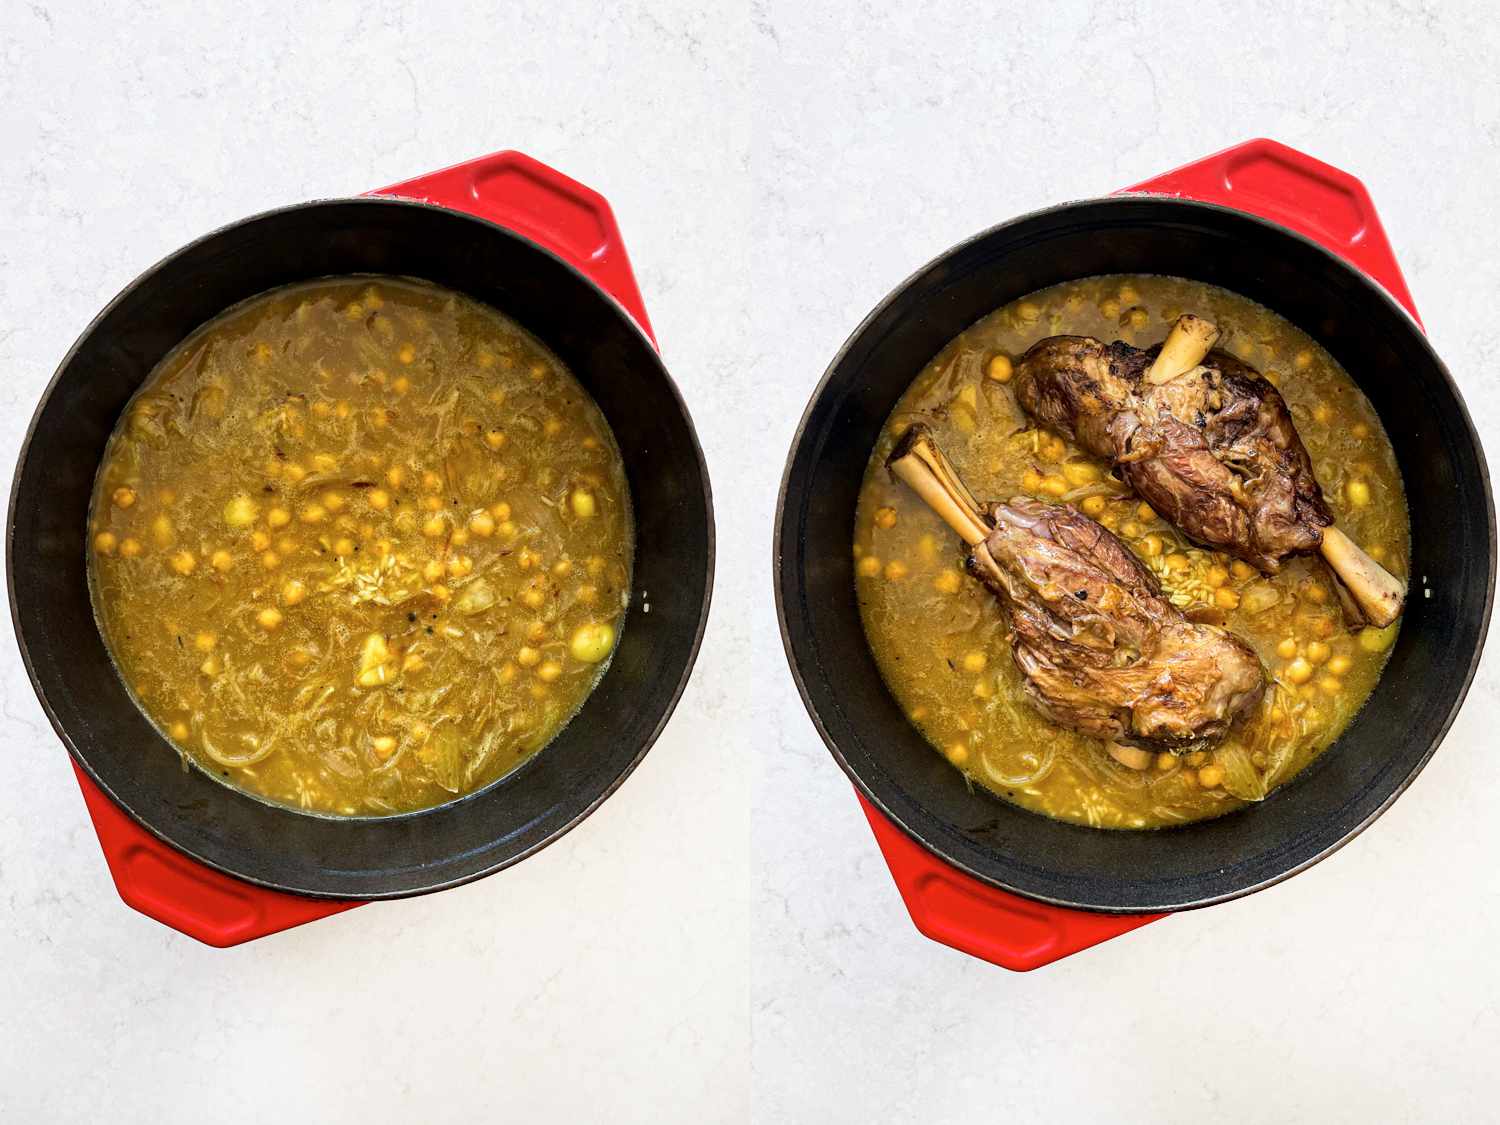 Side by side images of the stew in dutch oven before and after lamb is added.